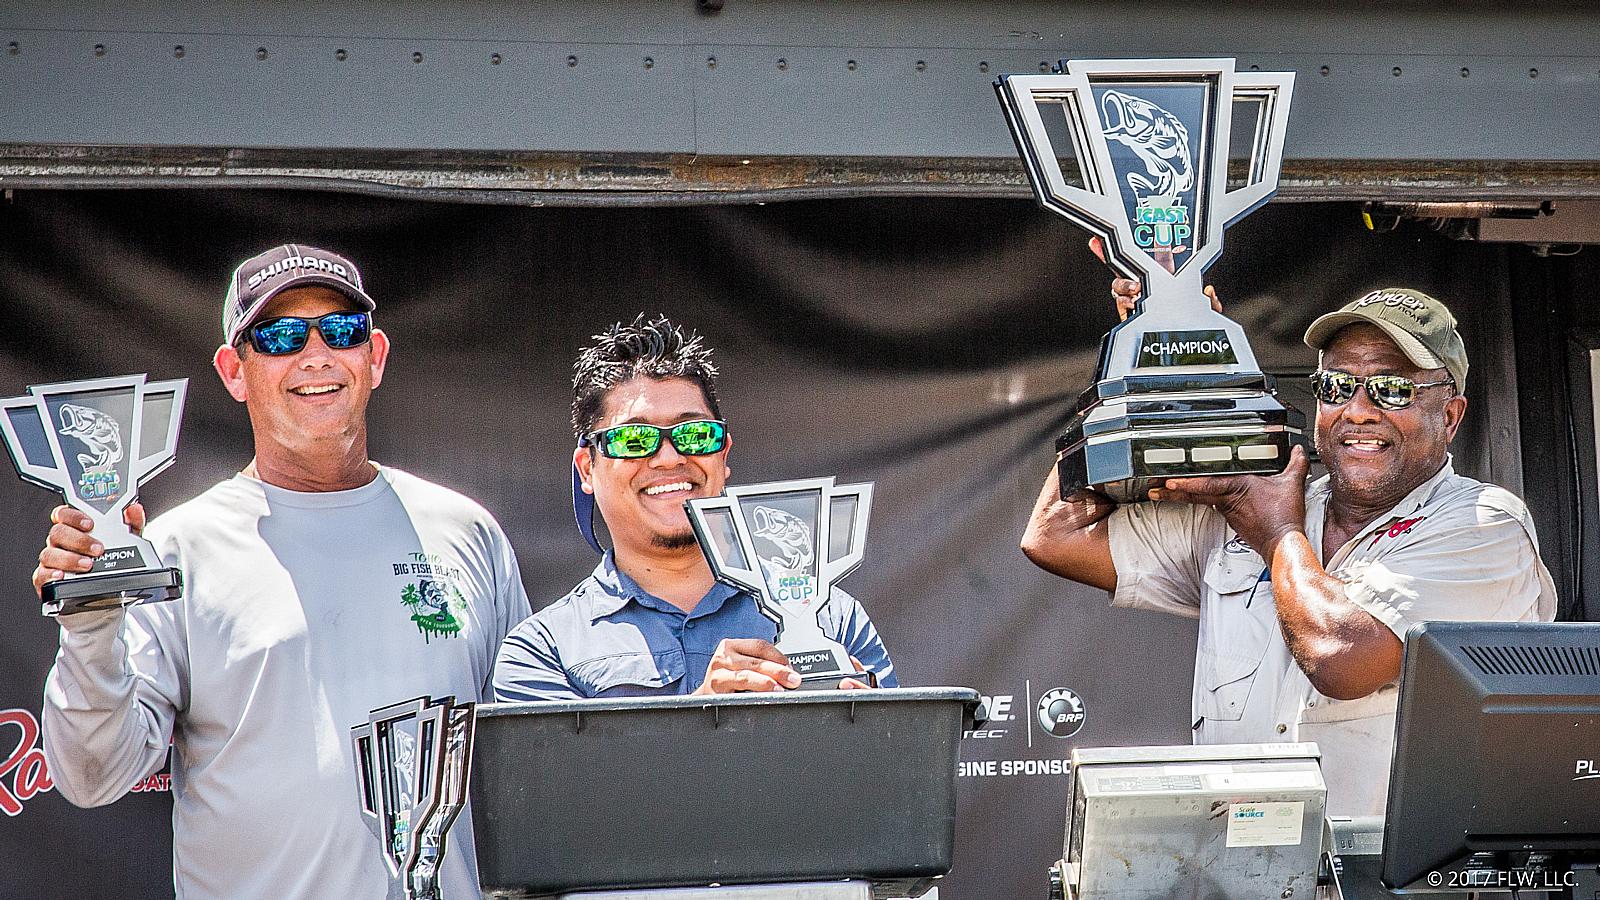 U.S.A Bassin Claims ICAST Cup - Major League Fishing